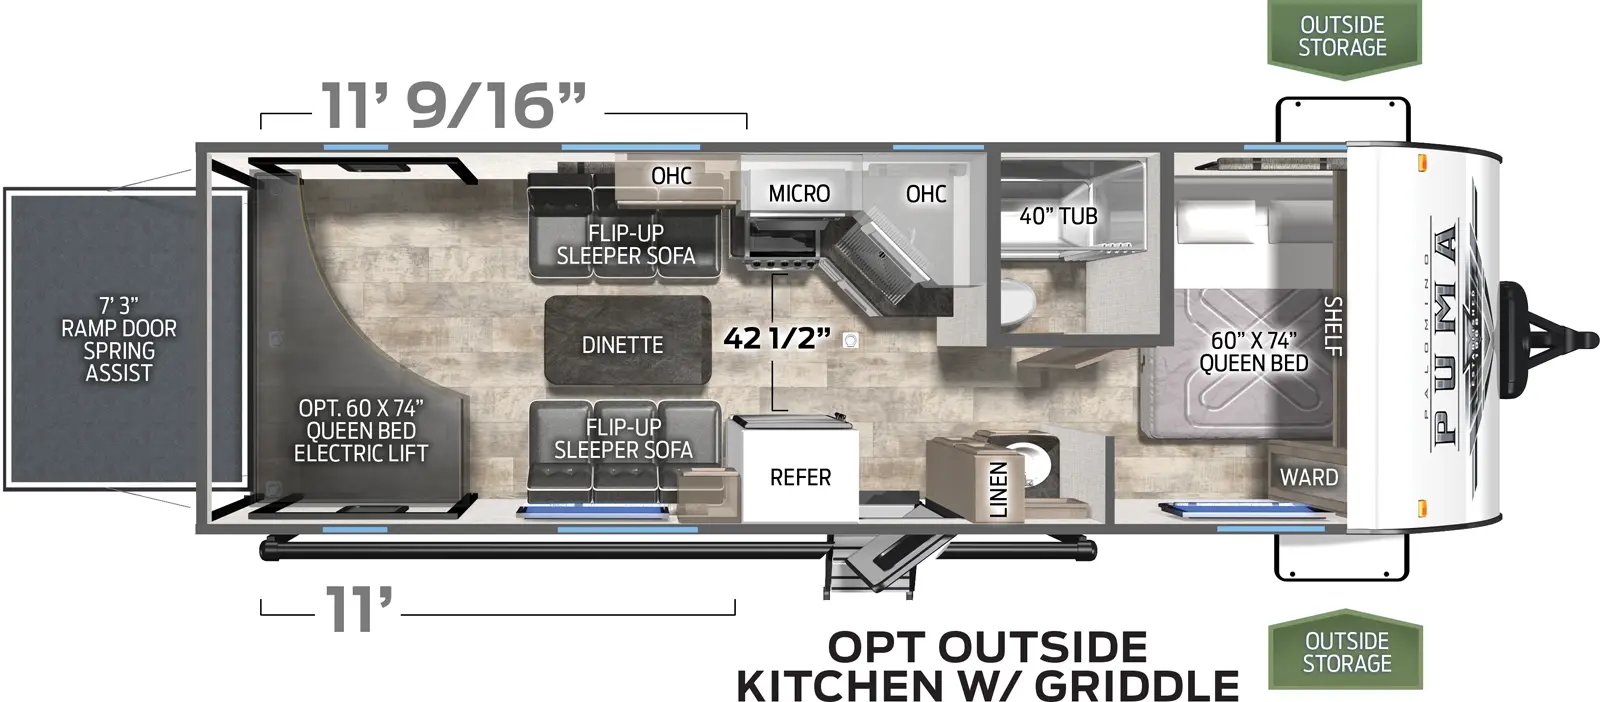 The 25TH has no slide outs. Exterior features include a 14 foot awning and an outside kitchen with griddle. Interior layout from the front to back: queen bed; full bathroom; pantry; kitchen with microwave, cooktop stove and refrigerator; dinette with flip up sleeper sofas; queen bed electric lift system; ramp door.